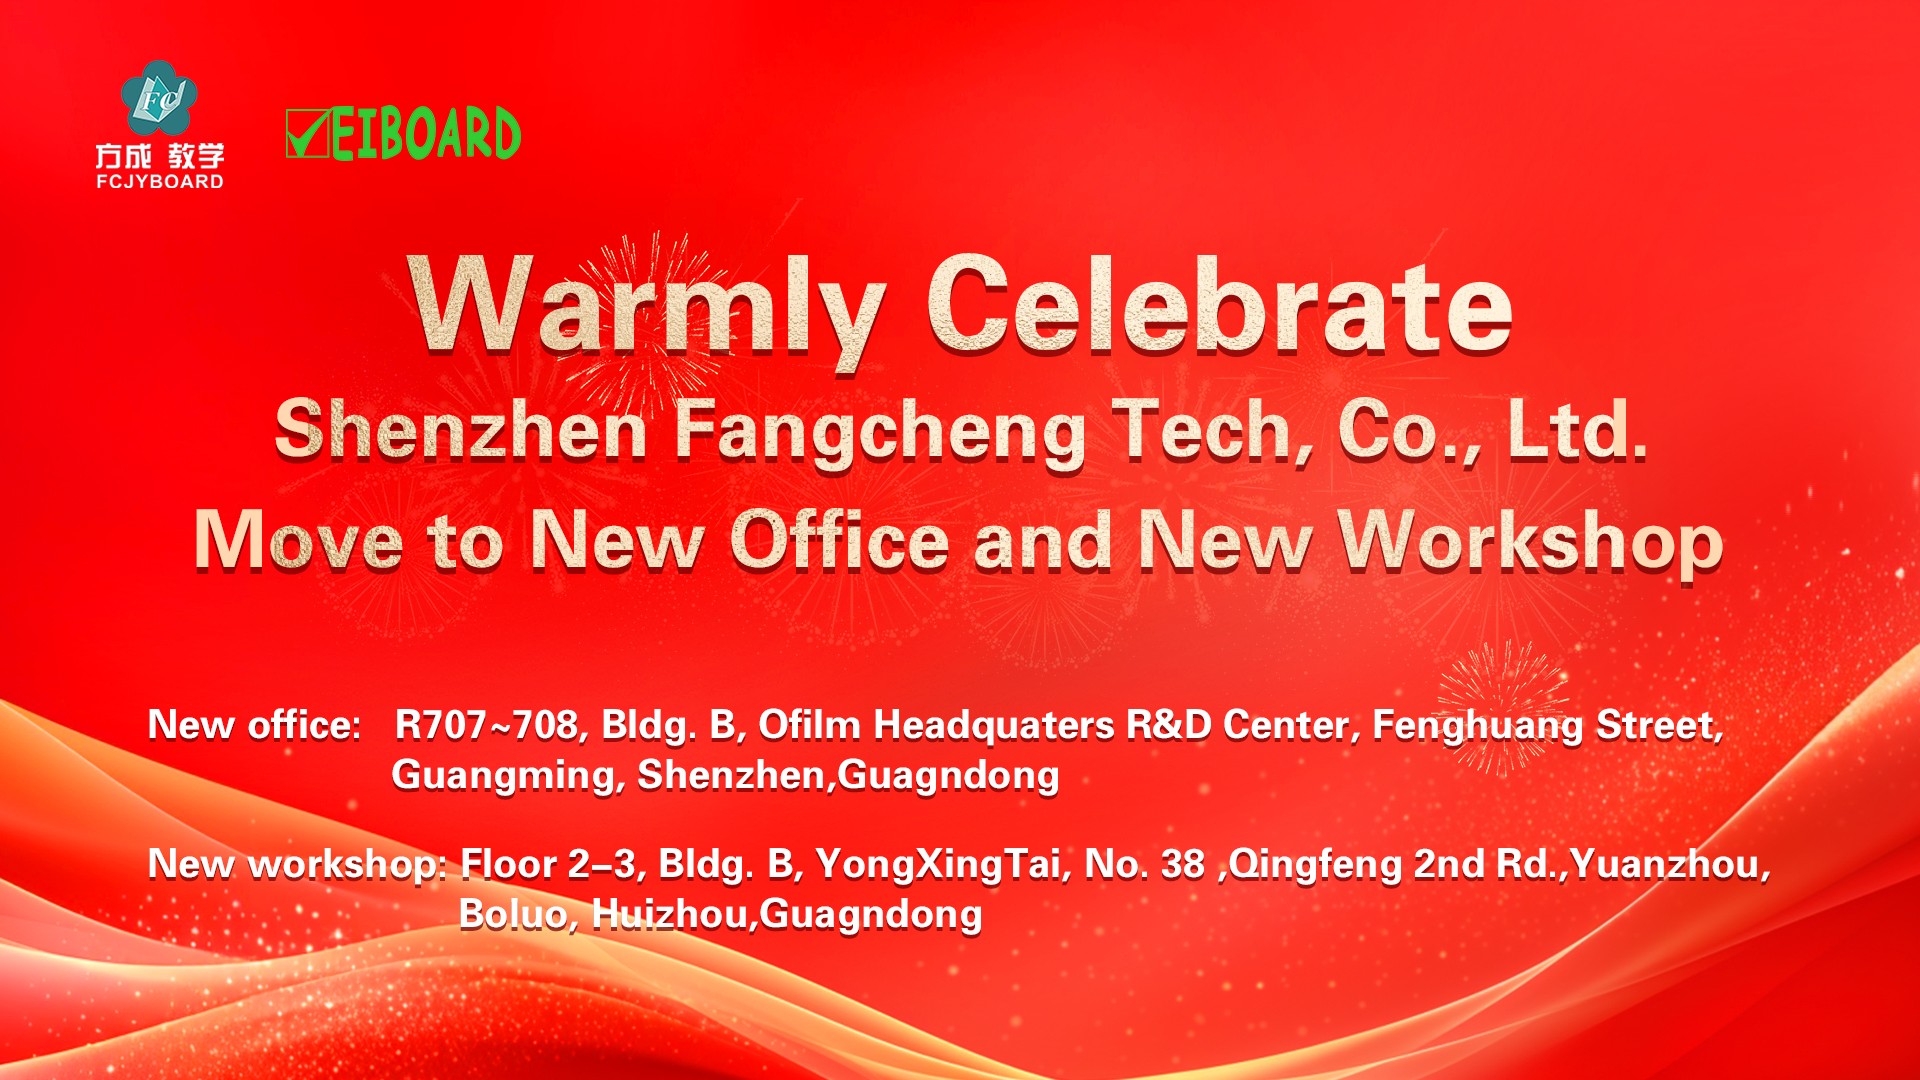 Warmly Celebrate Shenzhen Fangcheng Tech Co., Ltd. Move to New Office and New Workshop!